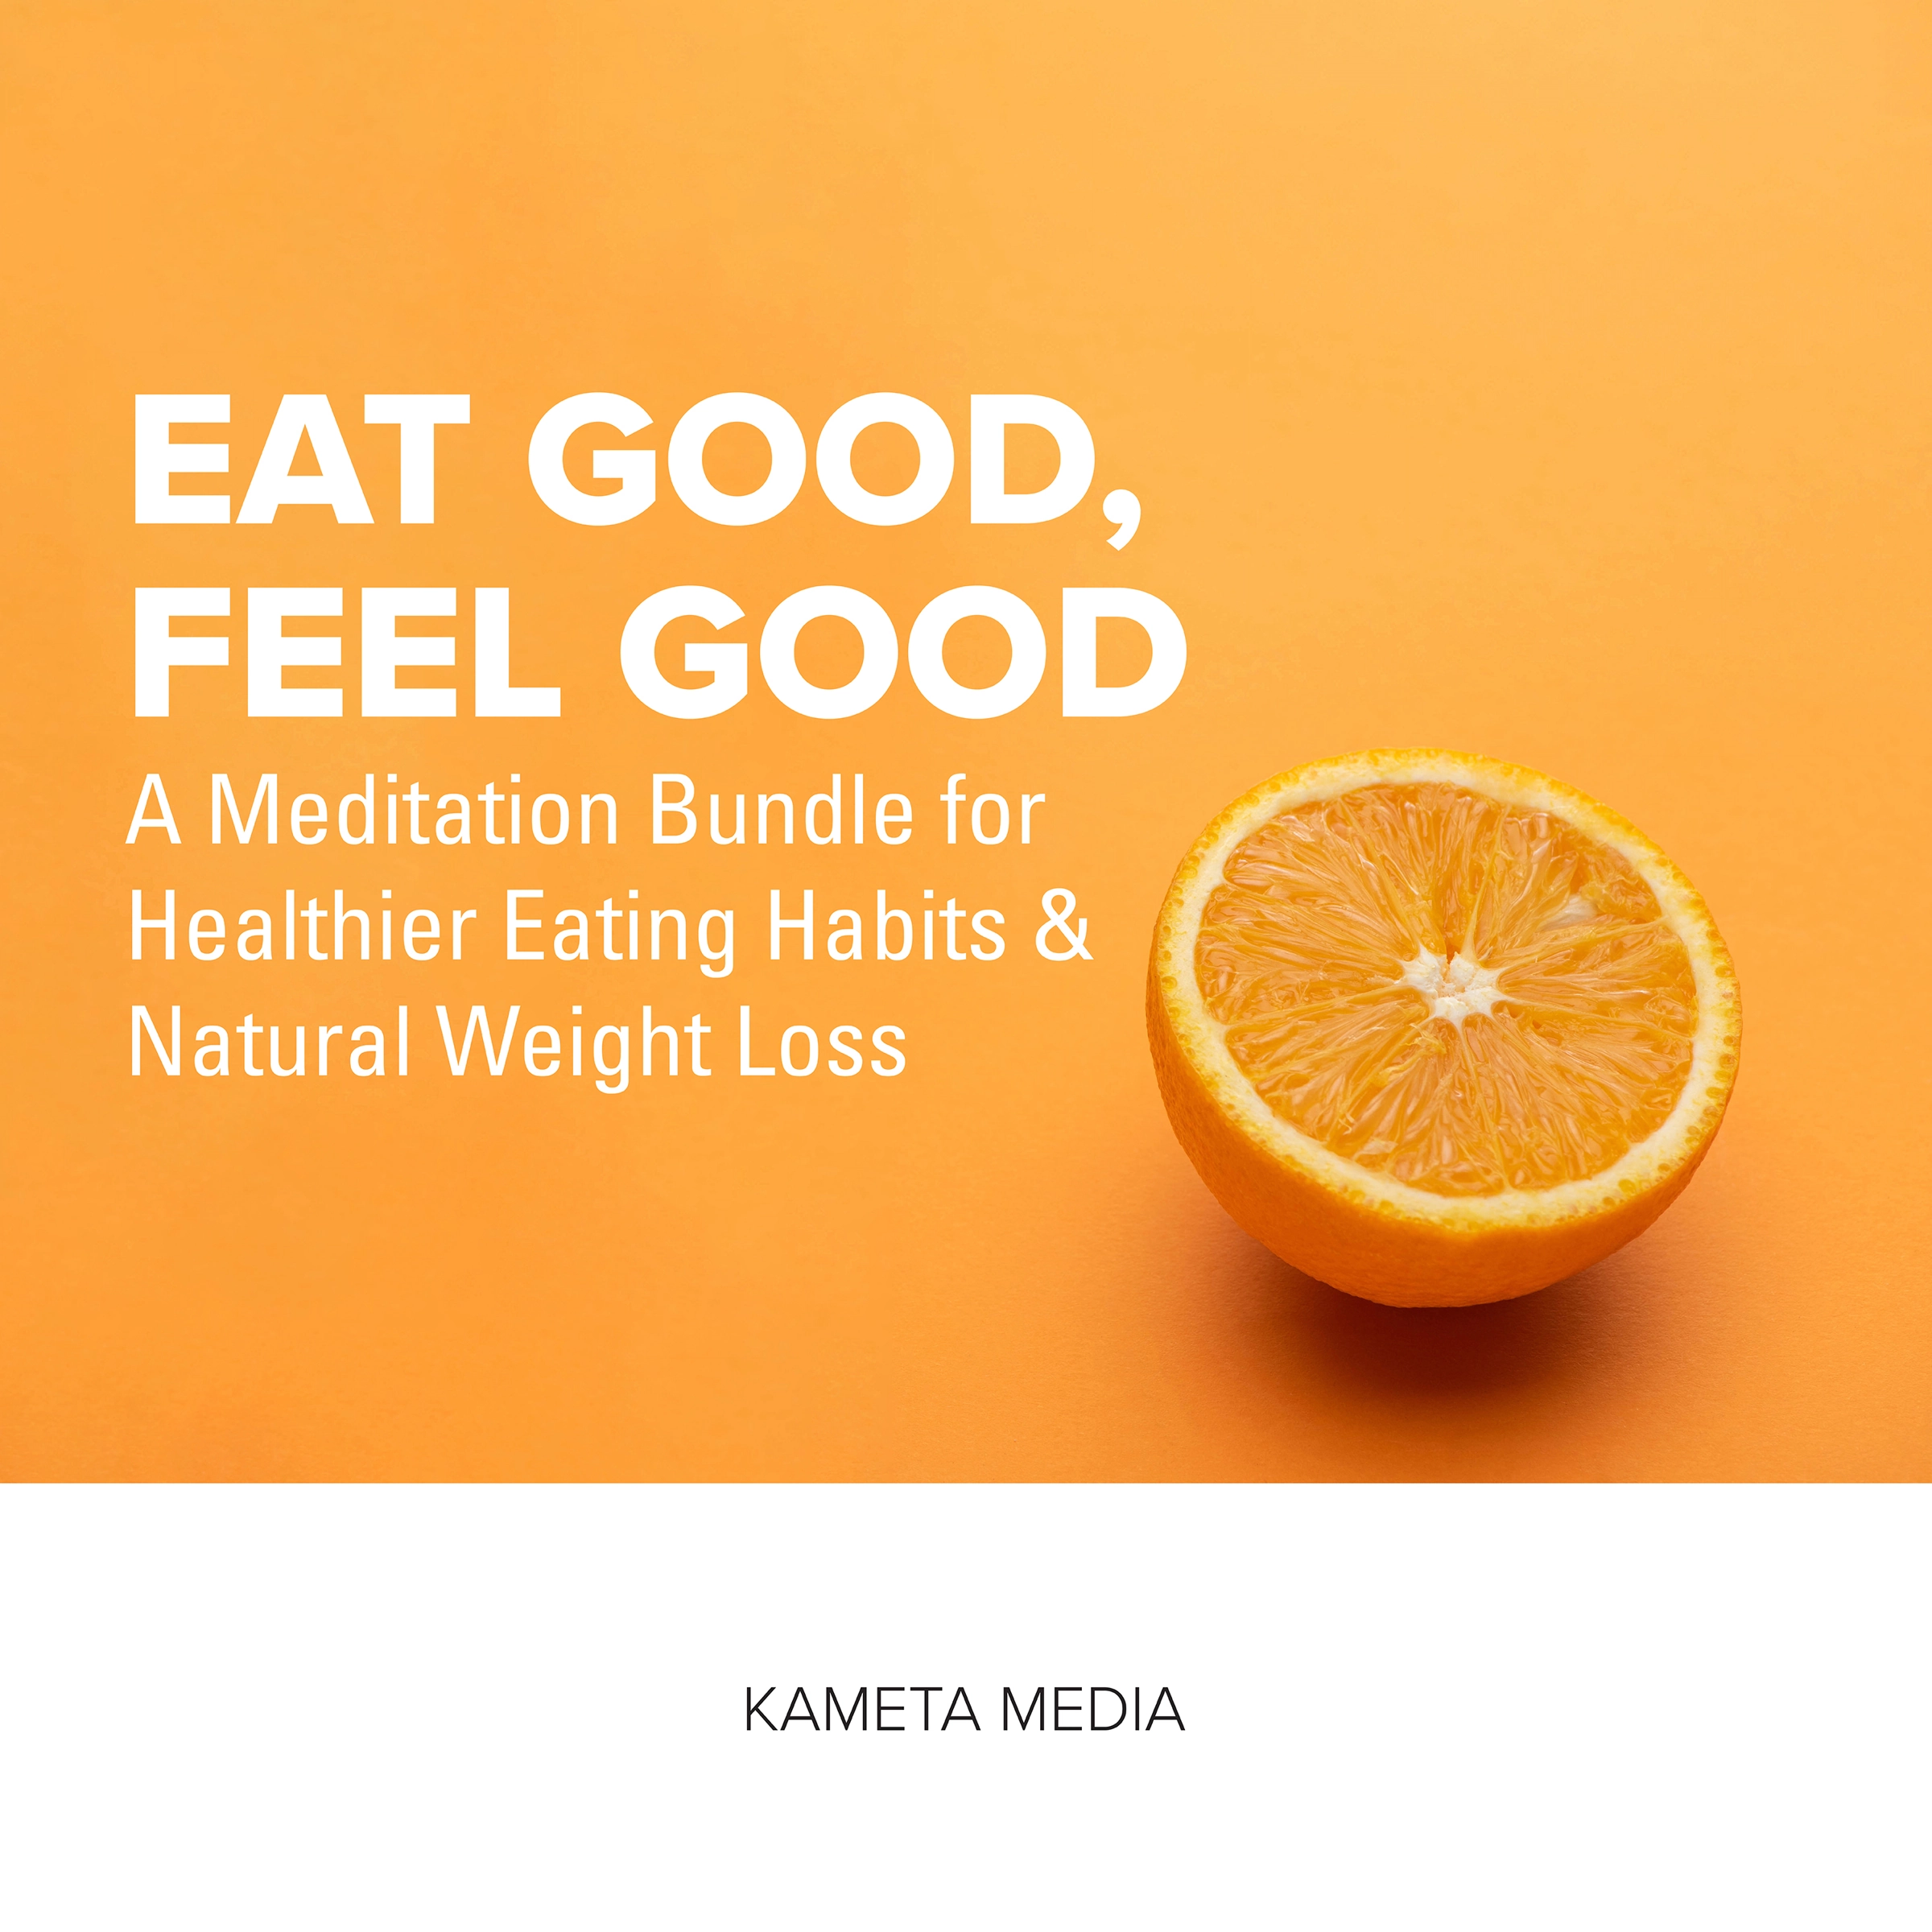 Eat Good, Feel Good: A Meditation Bundle for Healthier Eating Habits and Natural Weight Loss Audiobook by Kameta Media